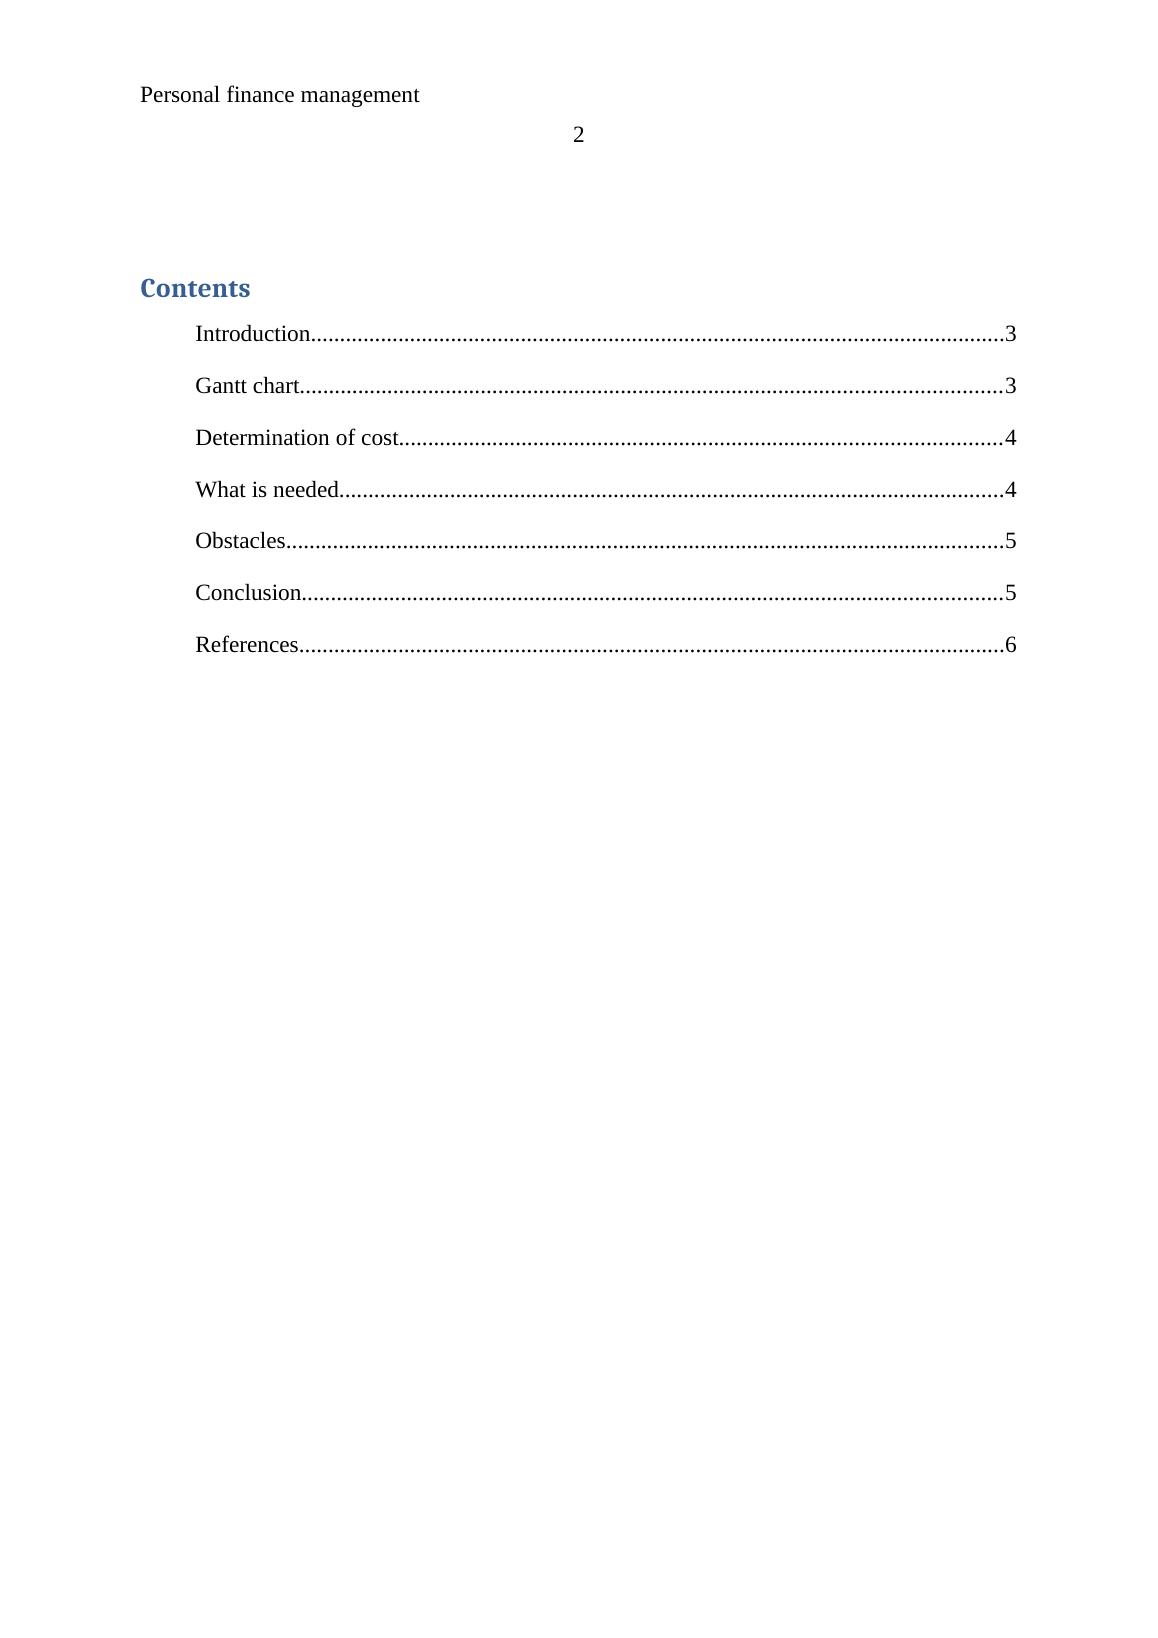 Report: Personal Finance Management_2